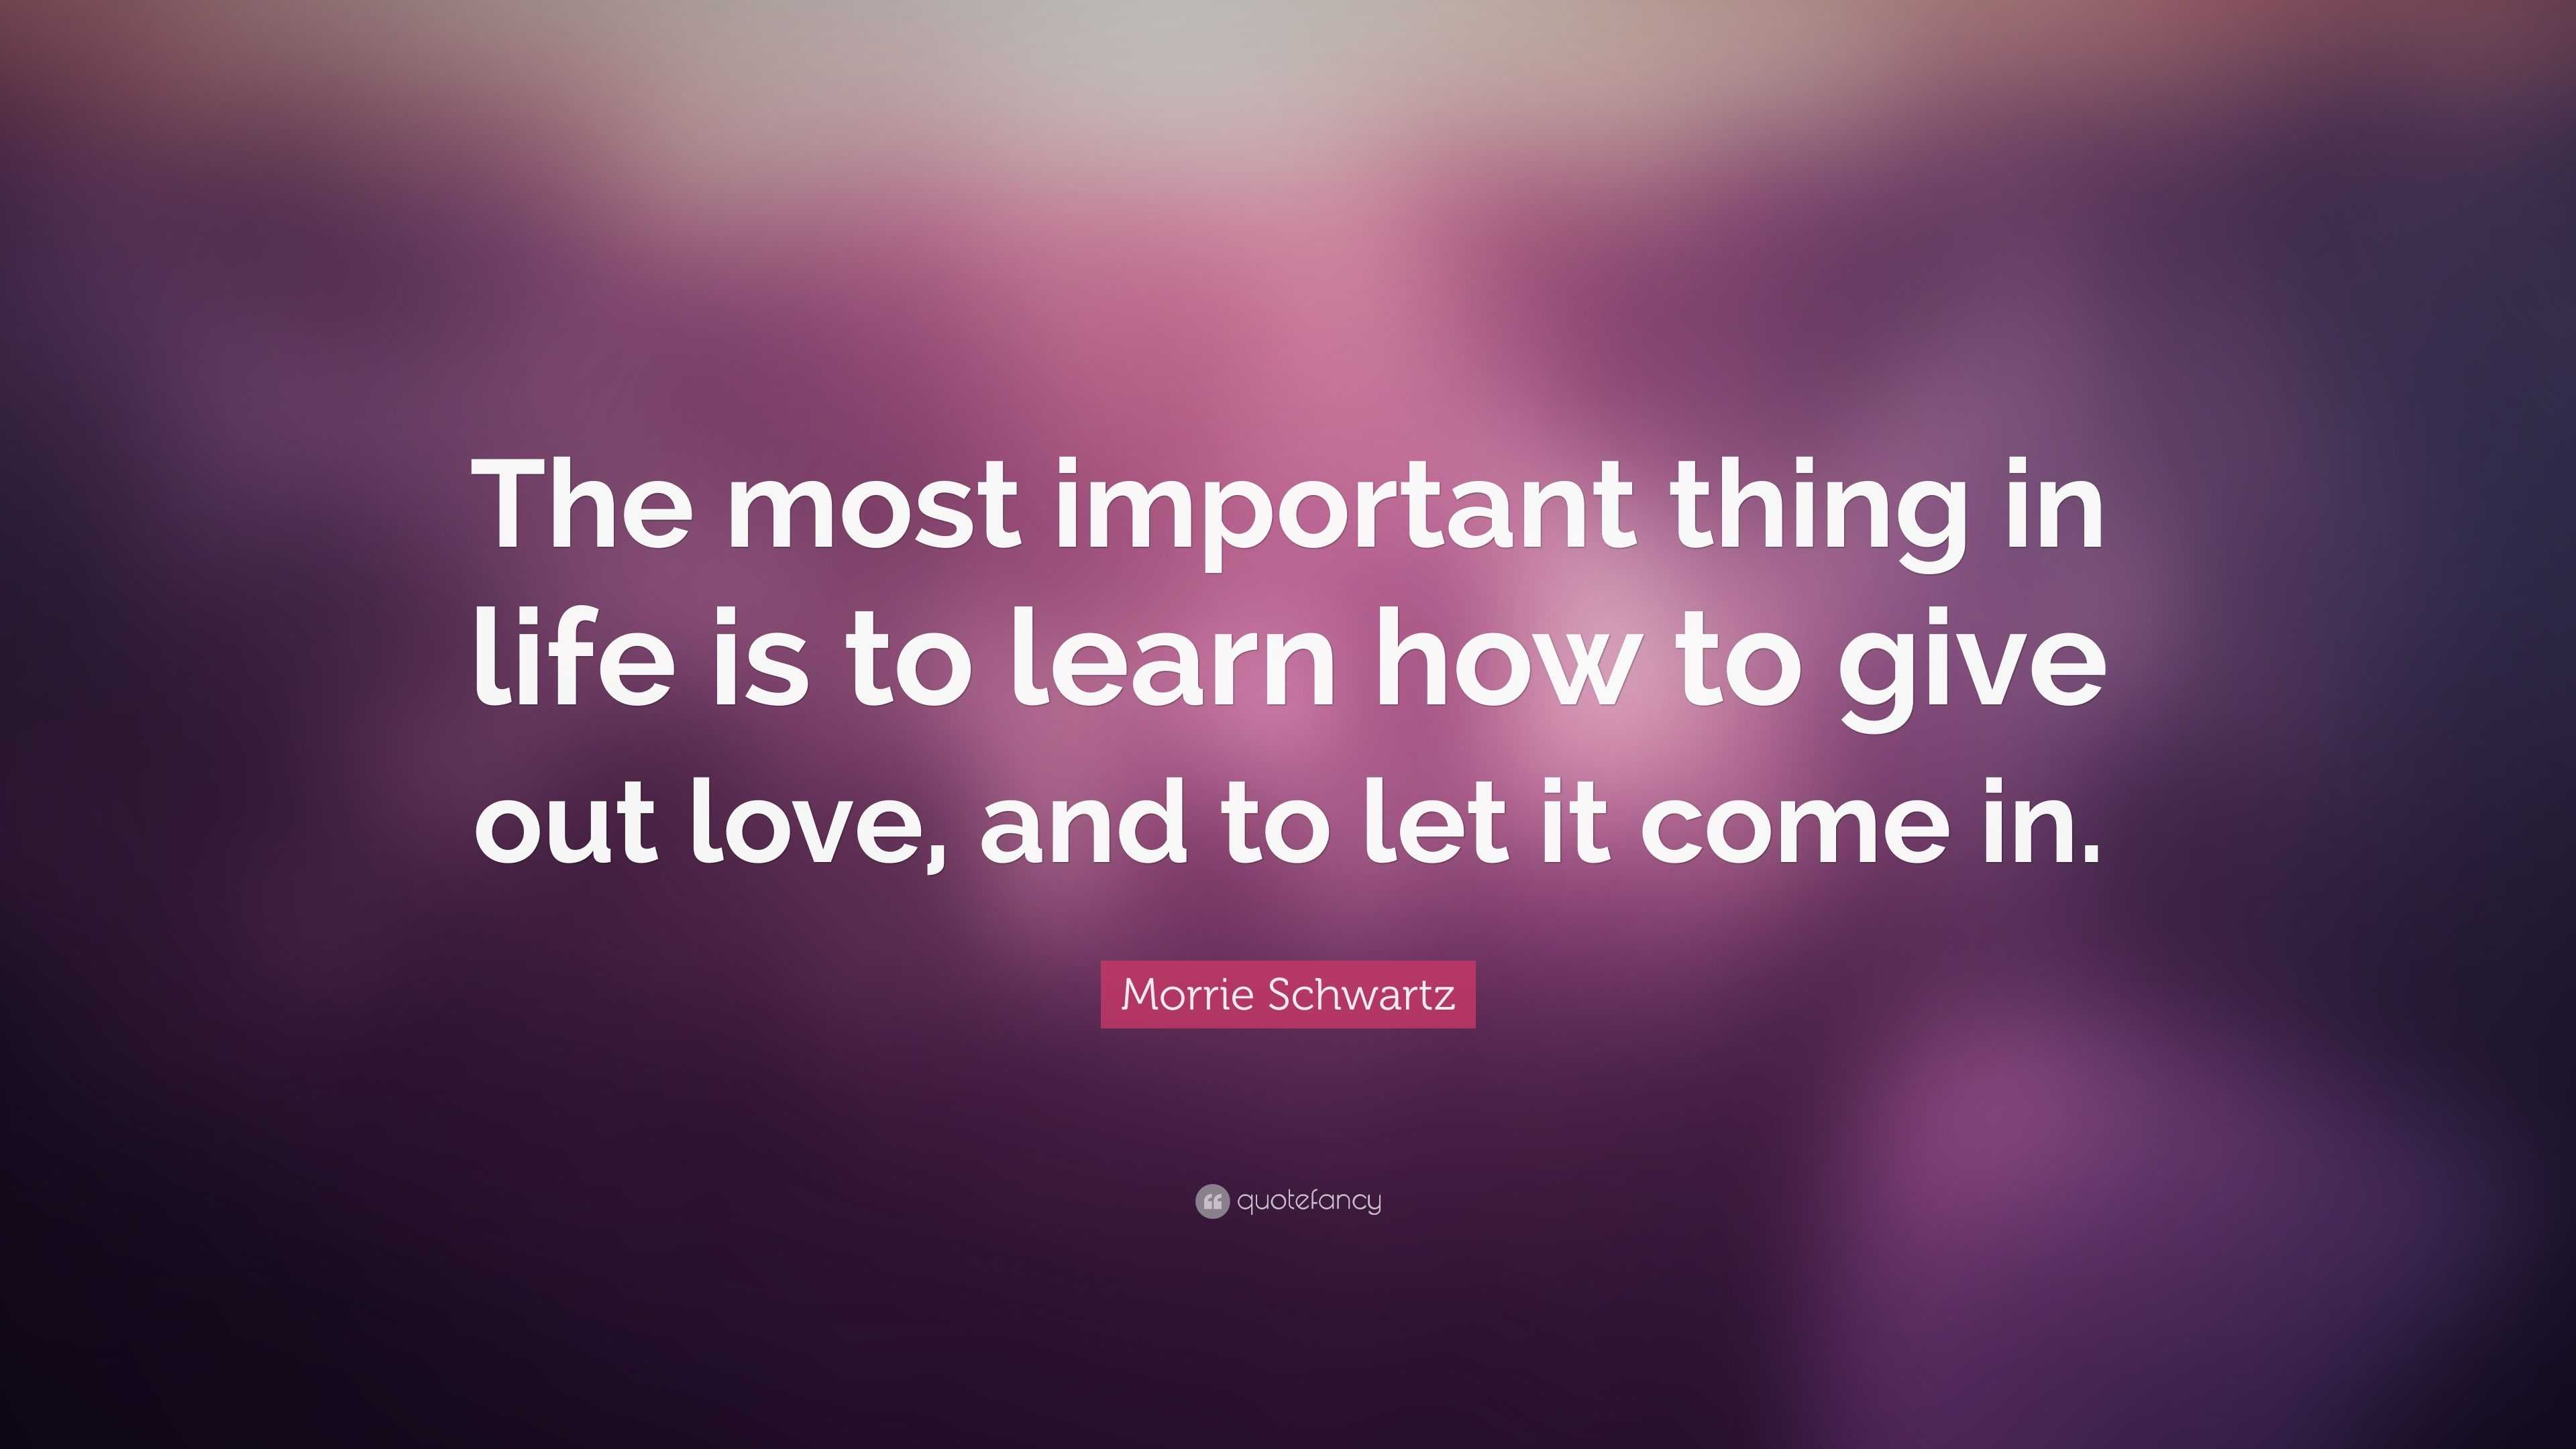 Morrie Schwartz Quote “The most important thing in life is to learn how to